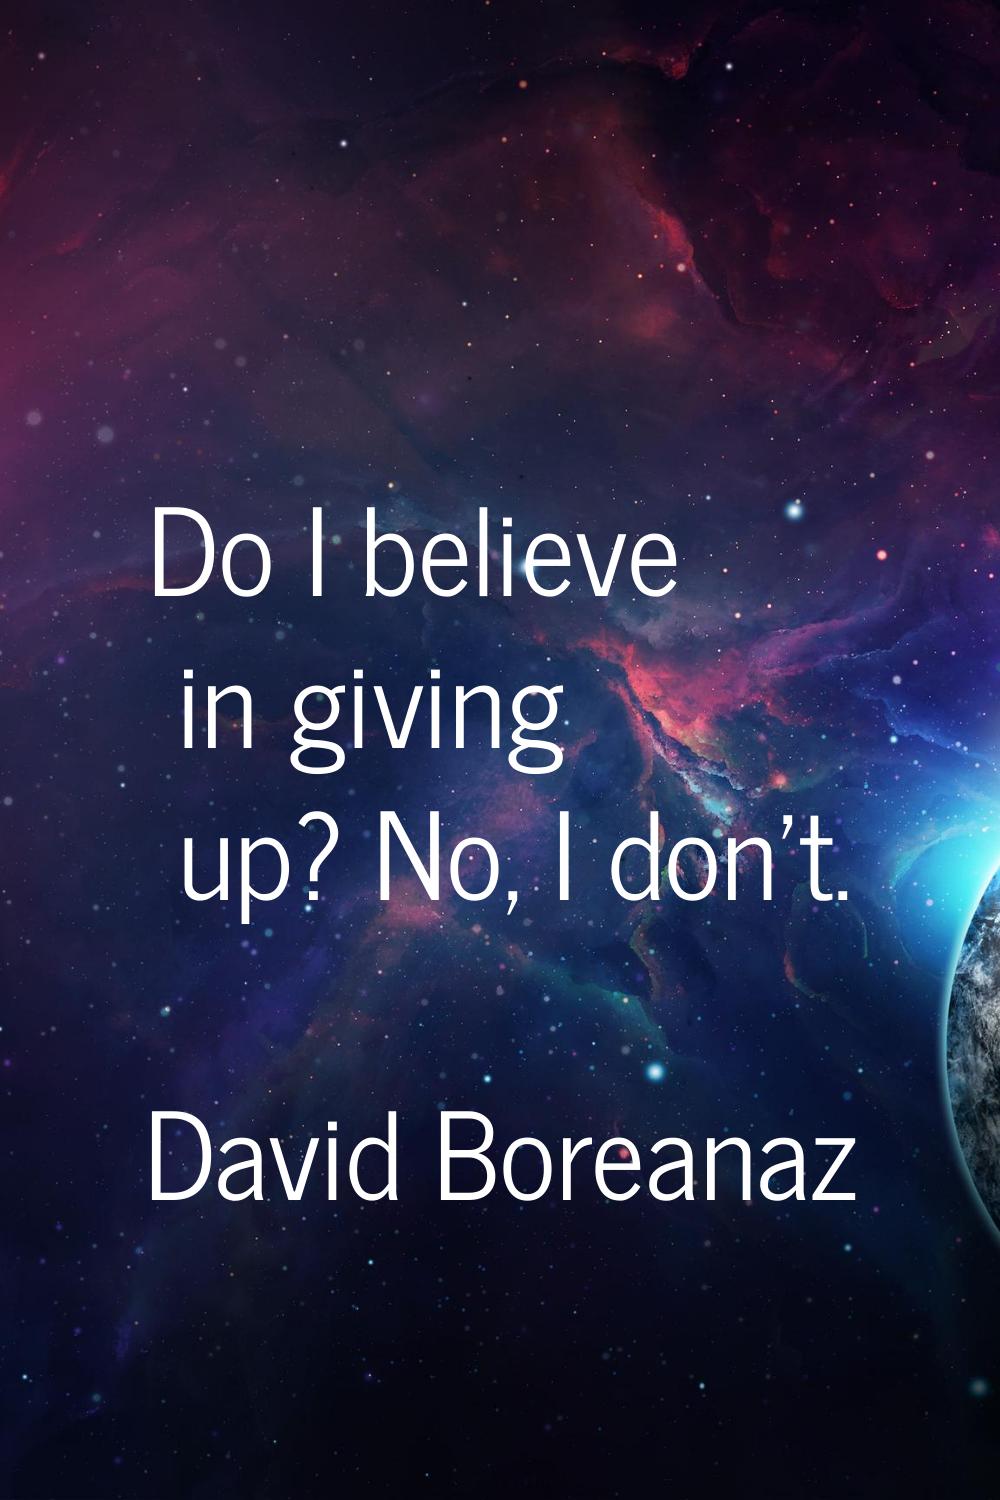 Do I believe in giving up? No, I don't.